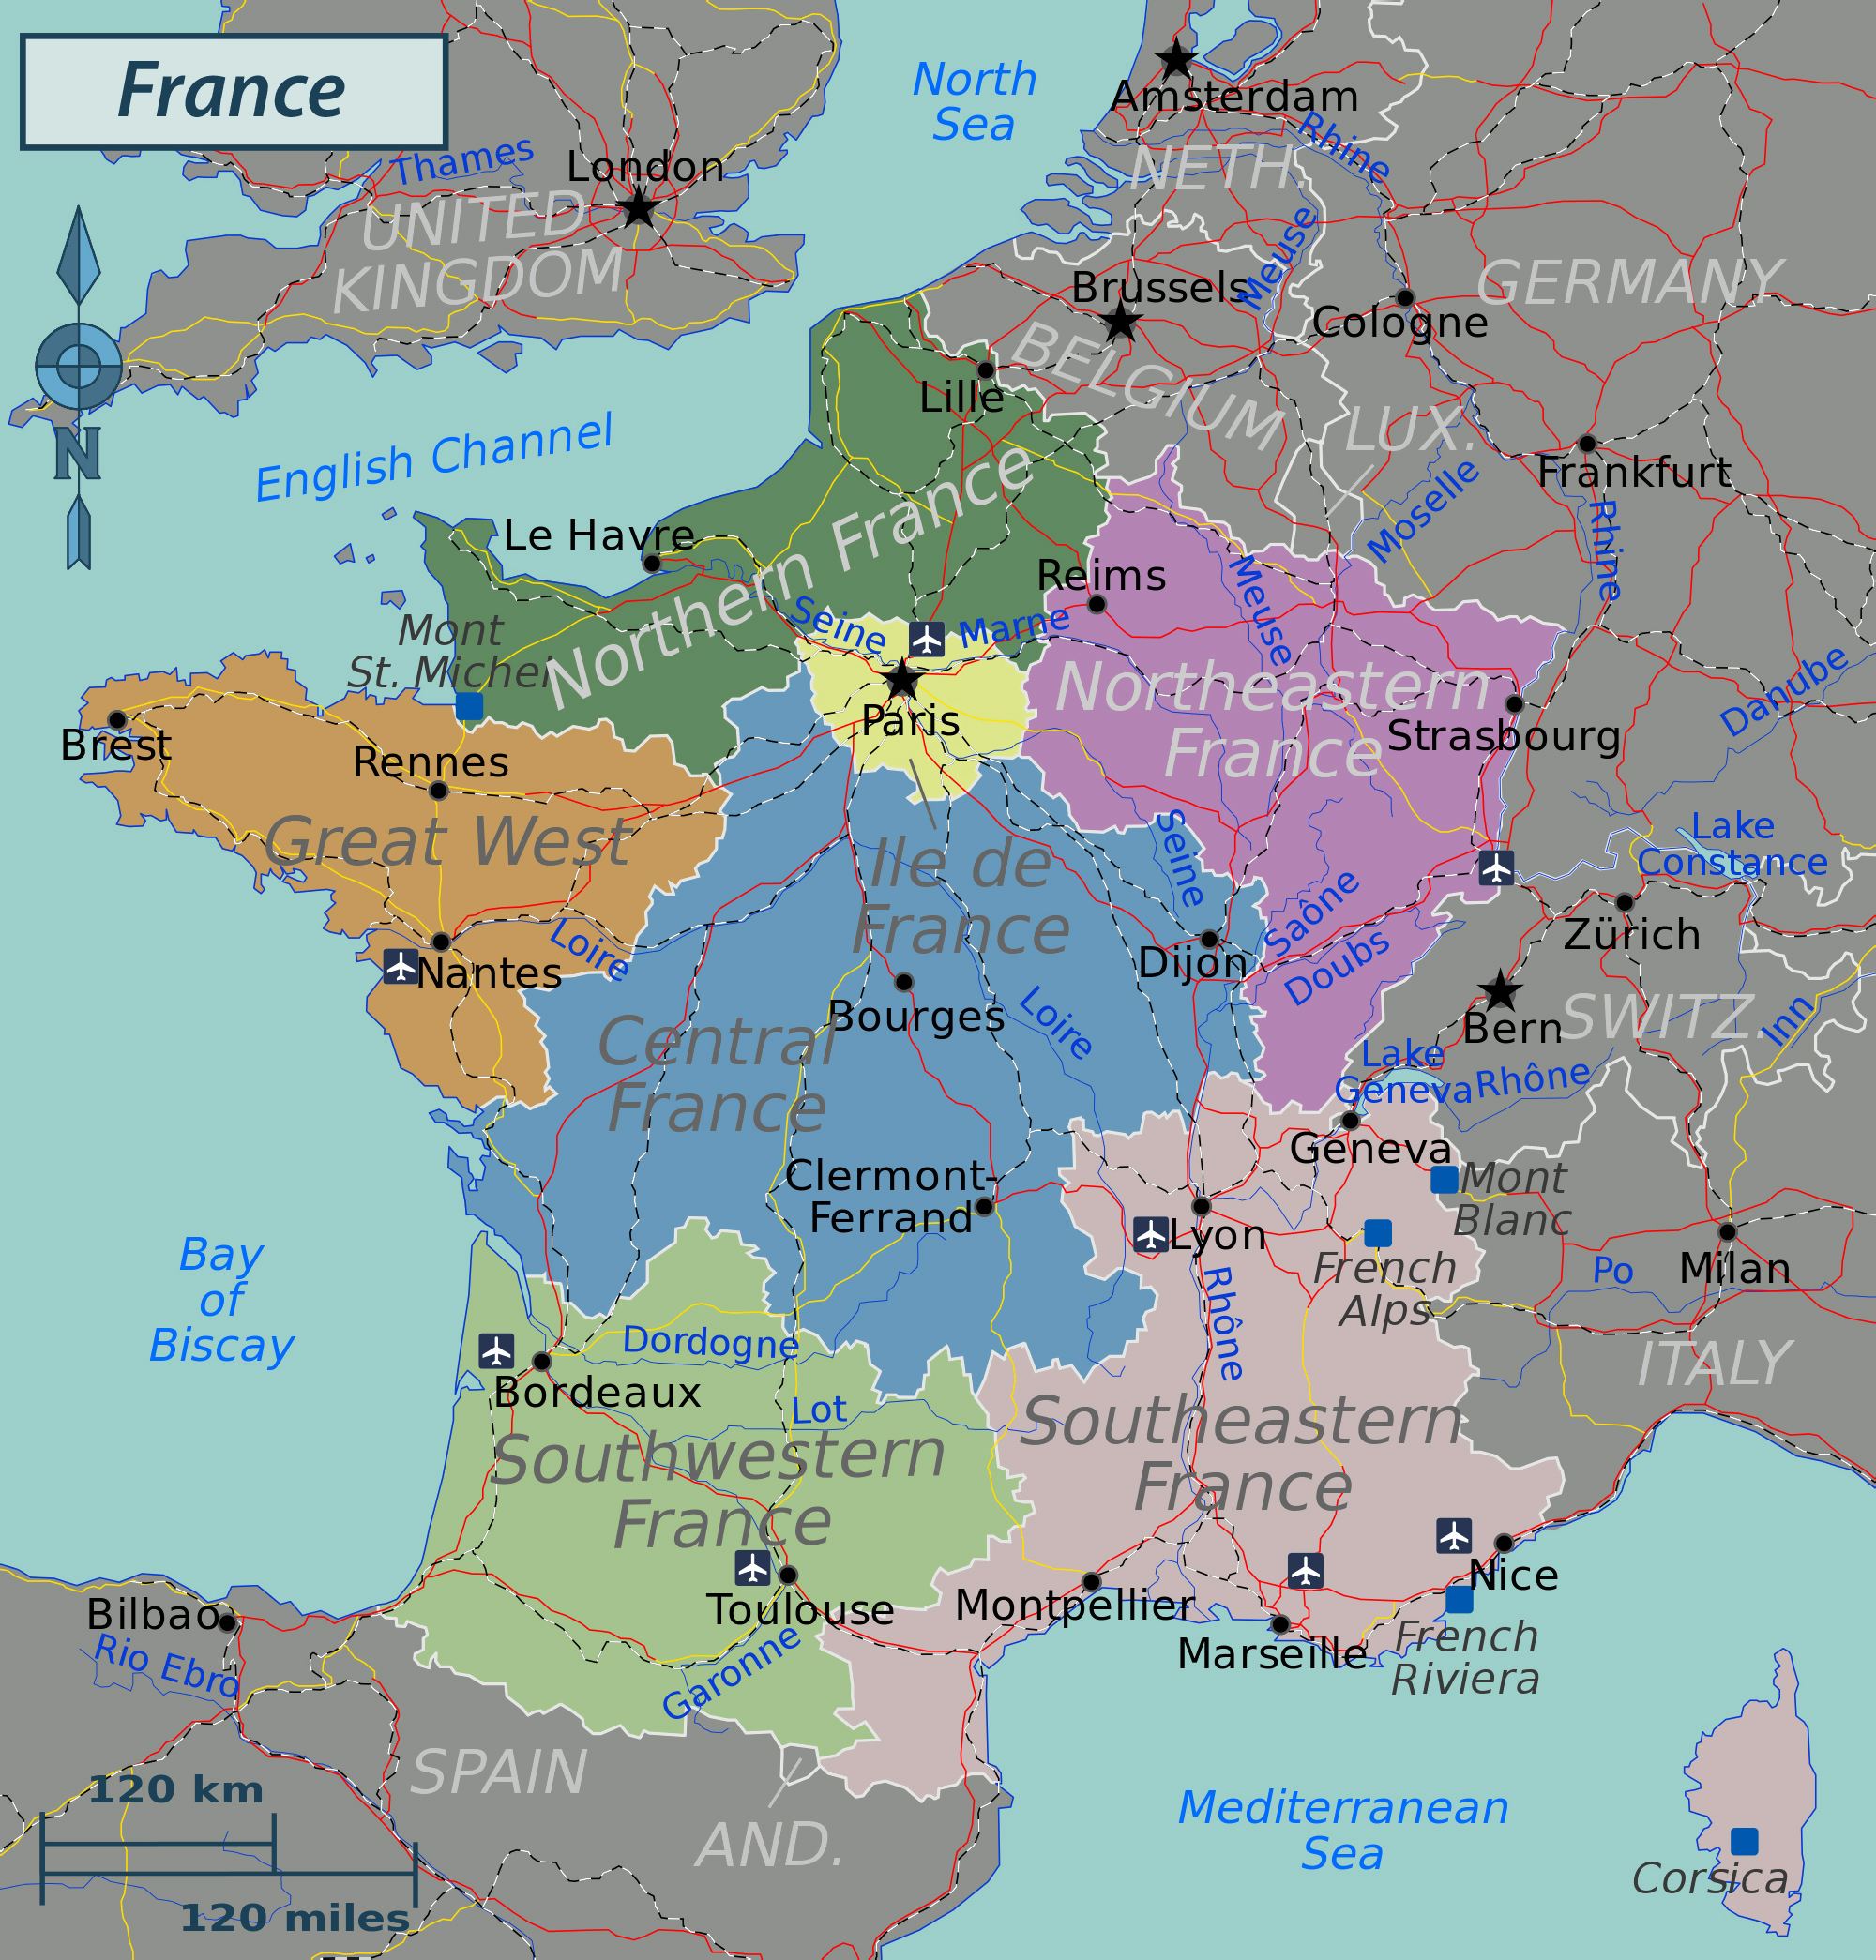 large-regions-map-of-france-france-europe-mapsland-maps-of-the